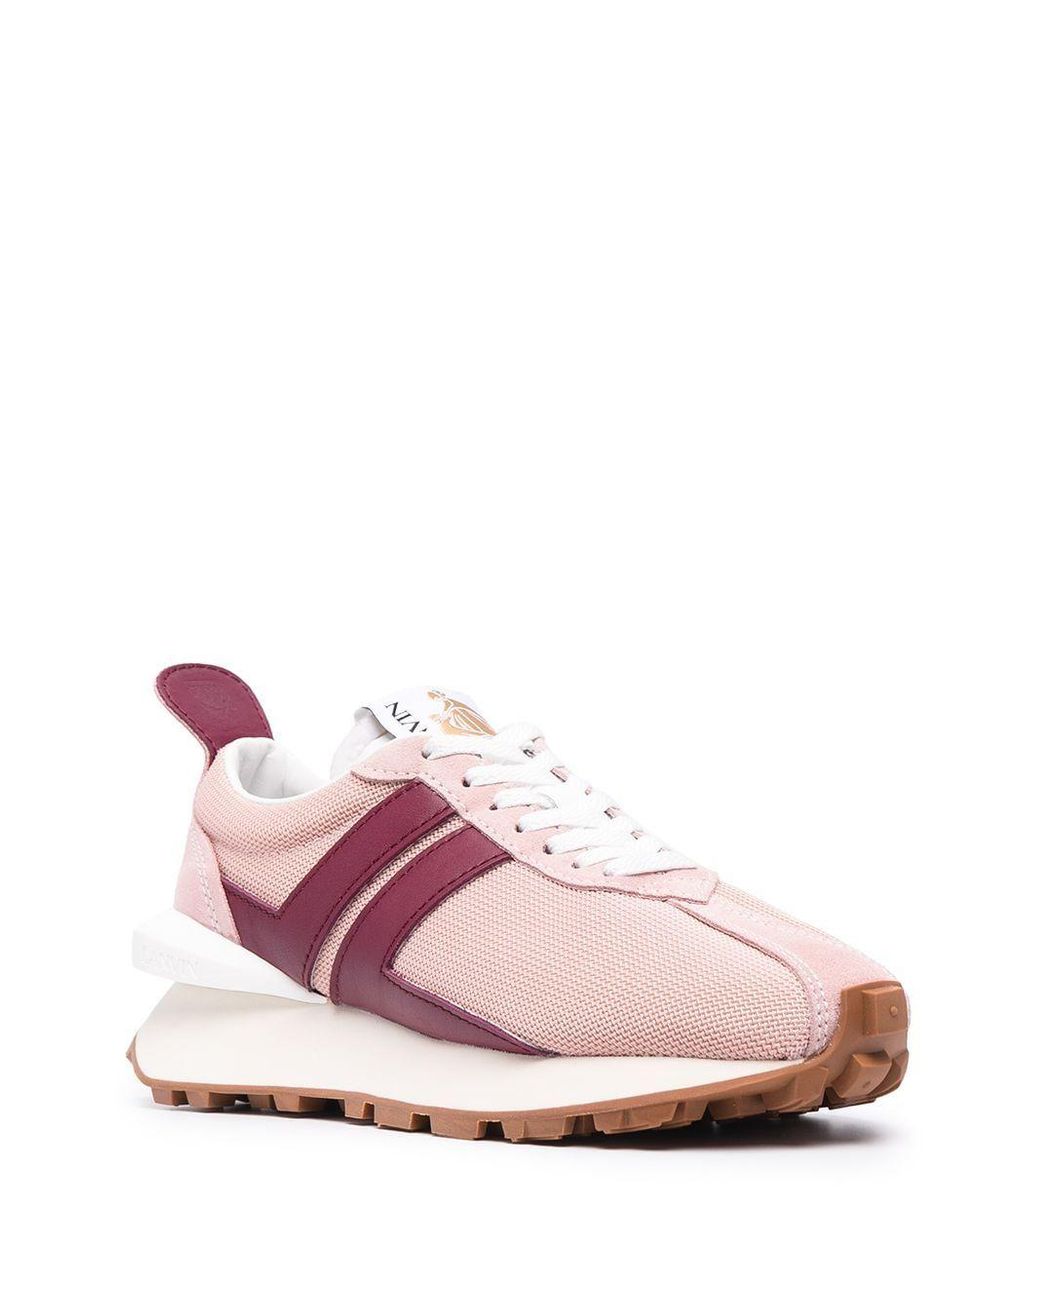 Lanvin Synthetic Polyester Sneakers in Pink - Lyst